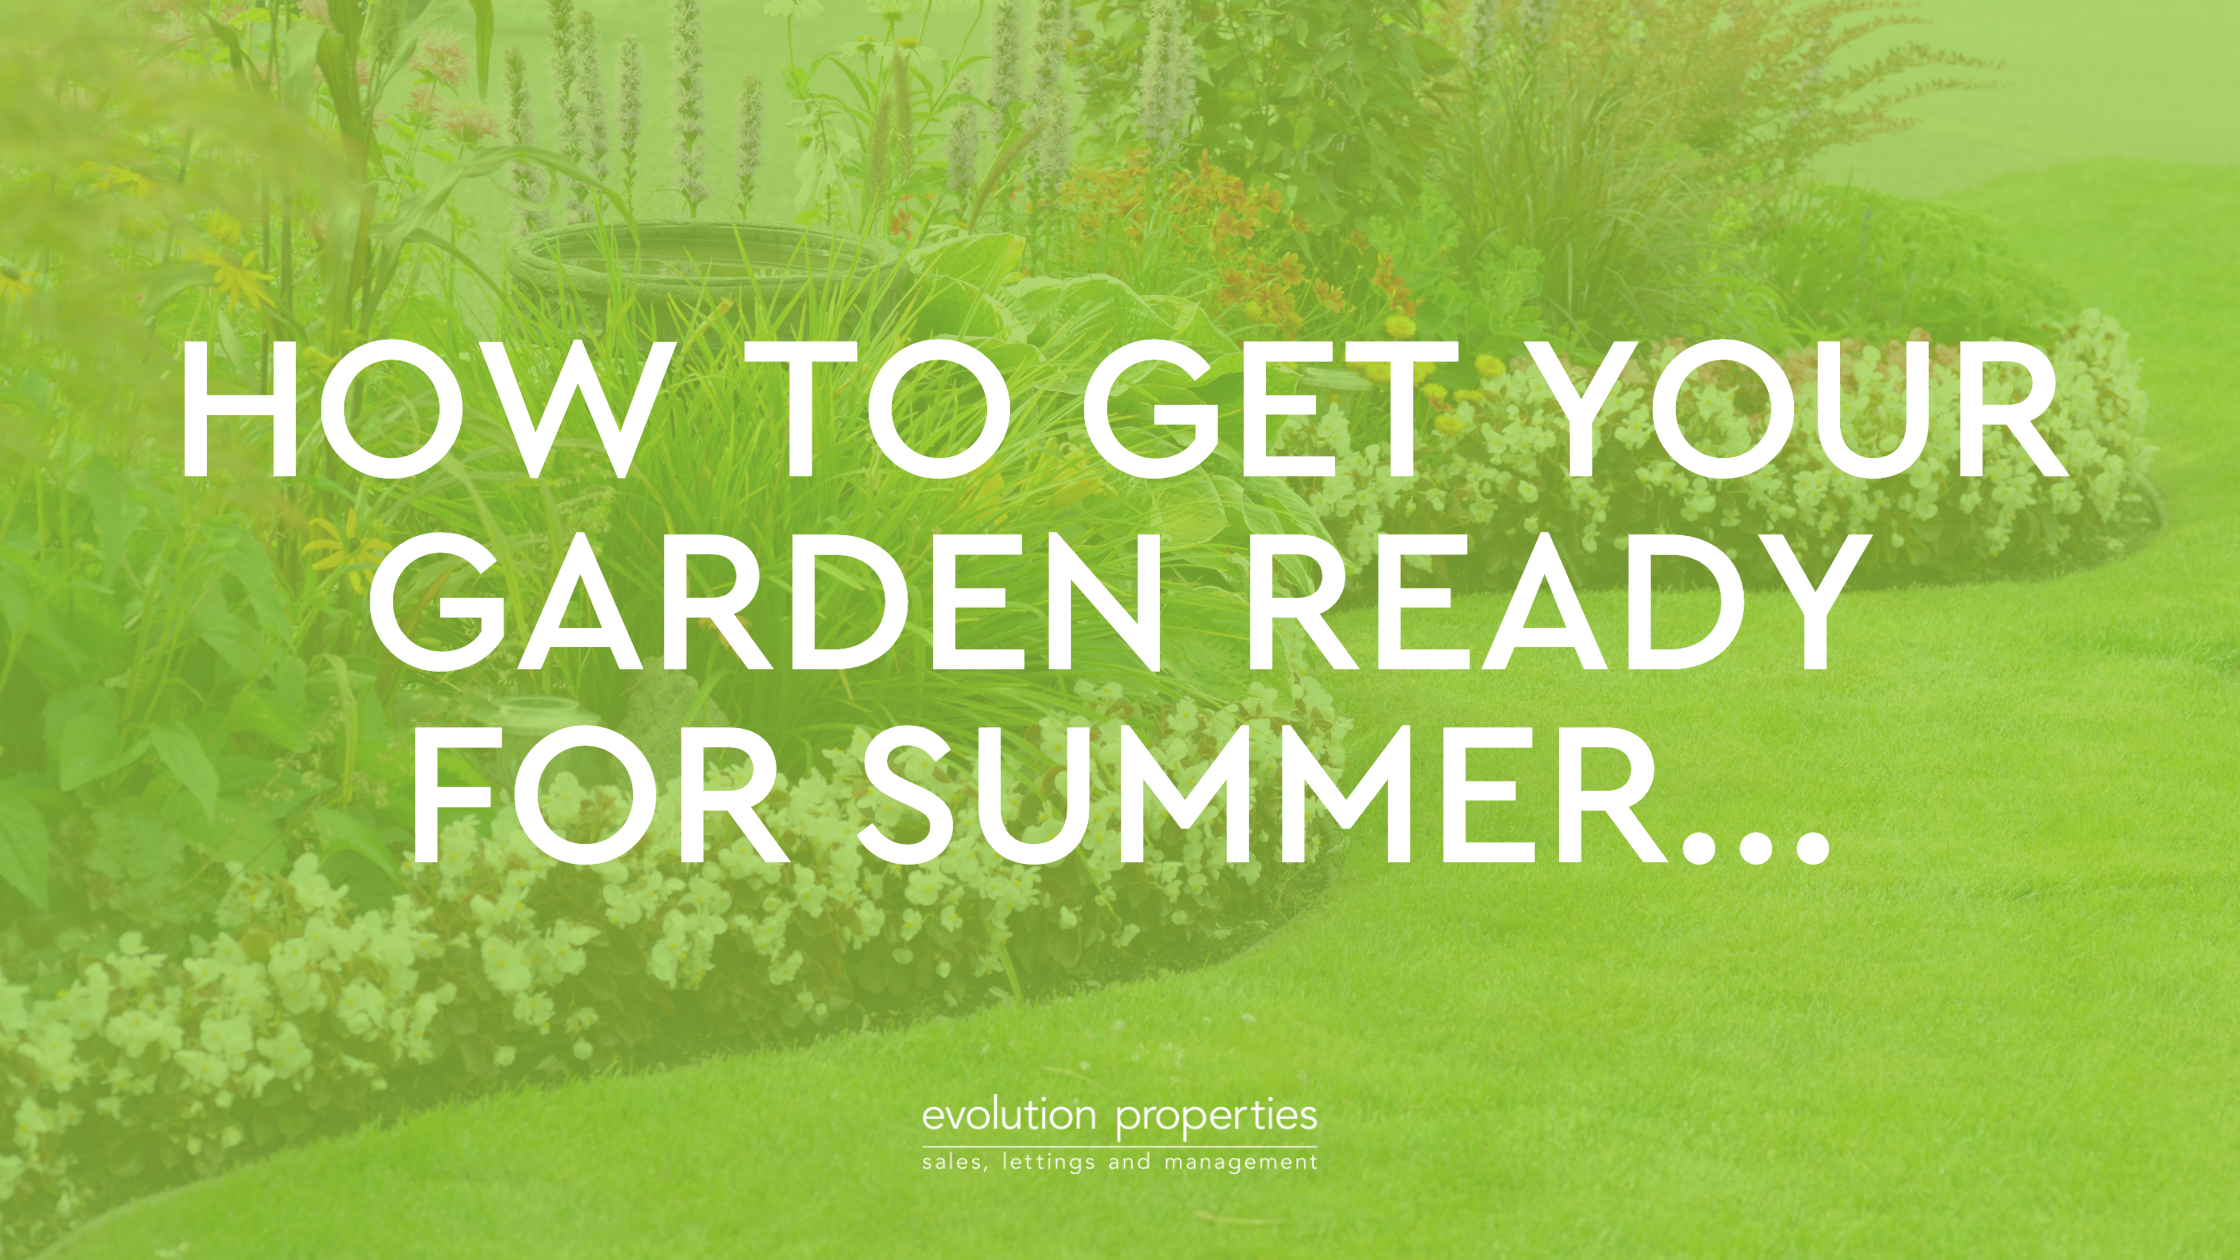 How to get your garden ready for summer...